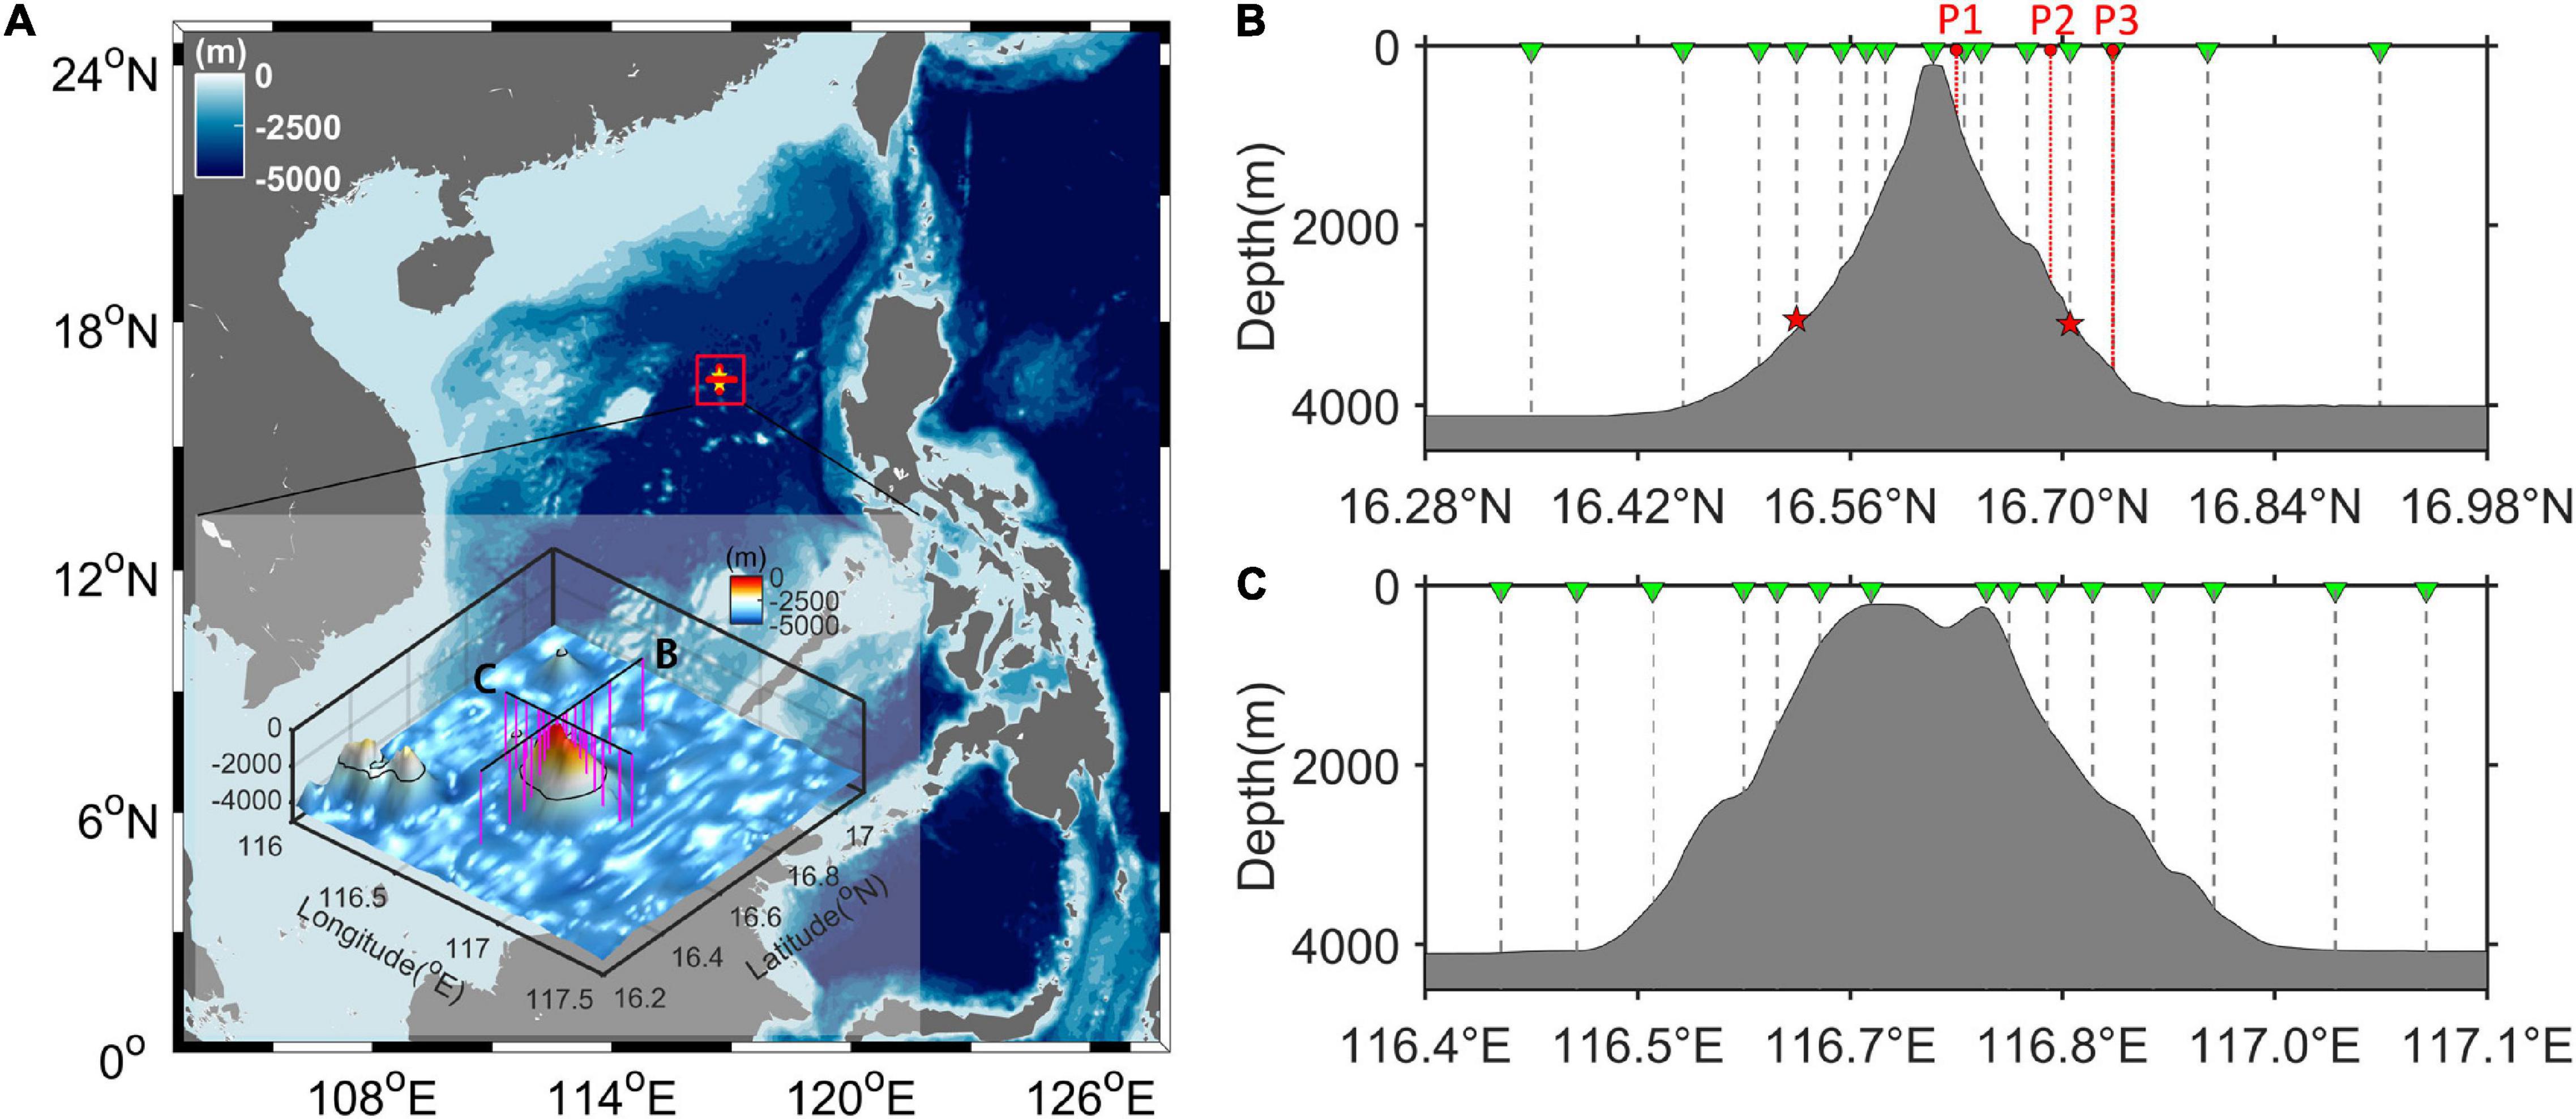 Frontiers  Circulation Driven by Multihump Turbulent Mixing Over a  Seamount in the South China Sea